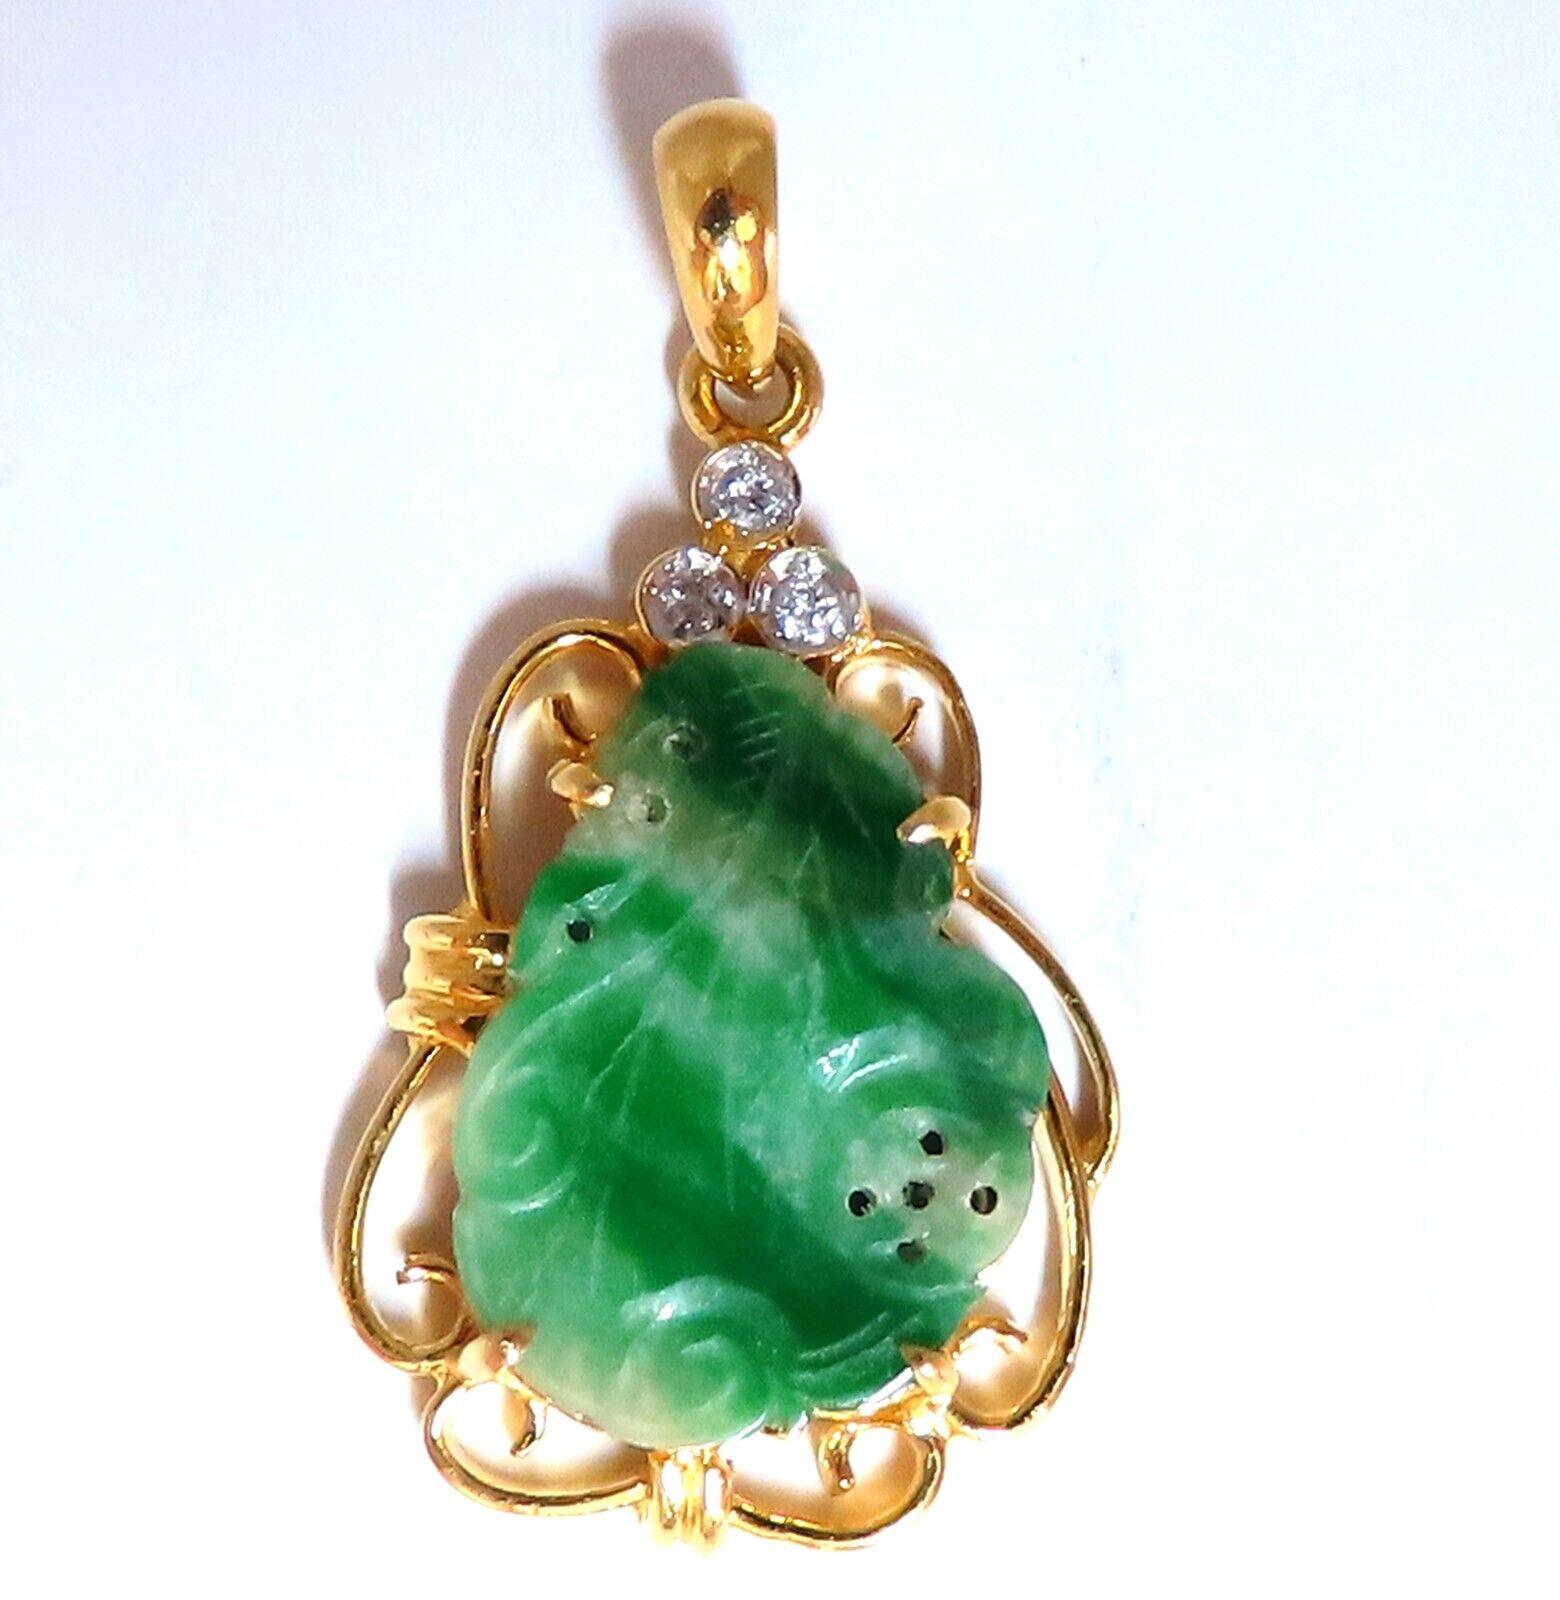  Jade Pendant

Apple Green color.

16 x 12mm

.06ct Natural Round Diamonds

Overall: 25 x 16mm

18kt / 3.4 grams